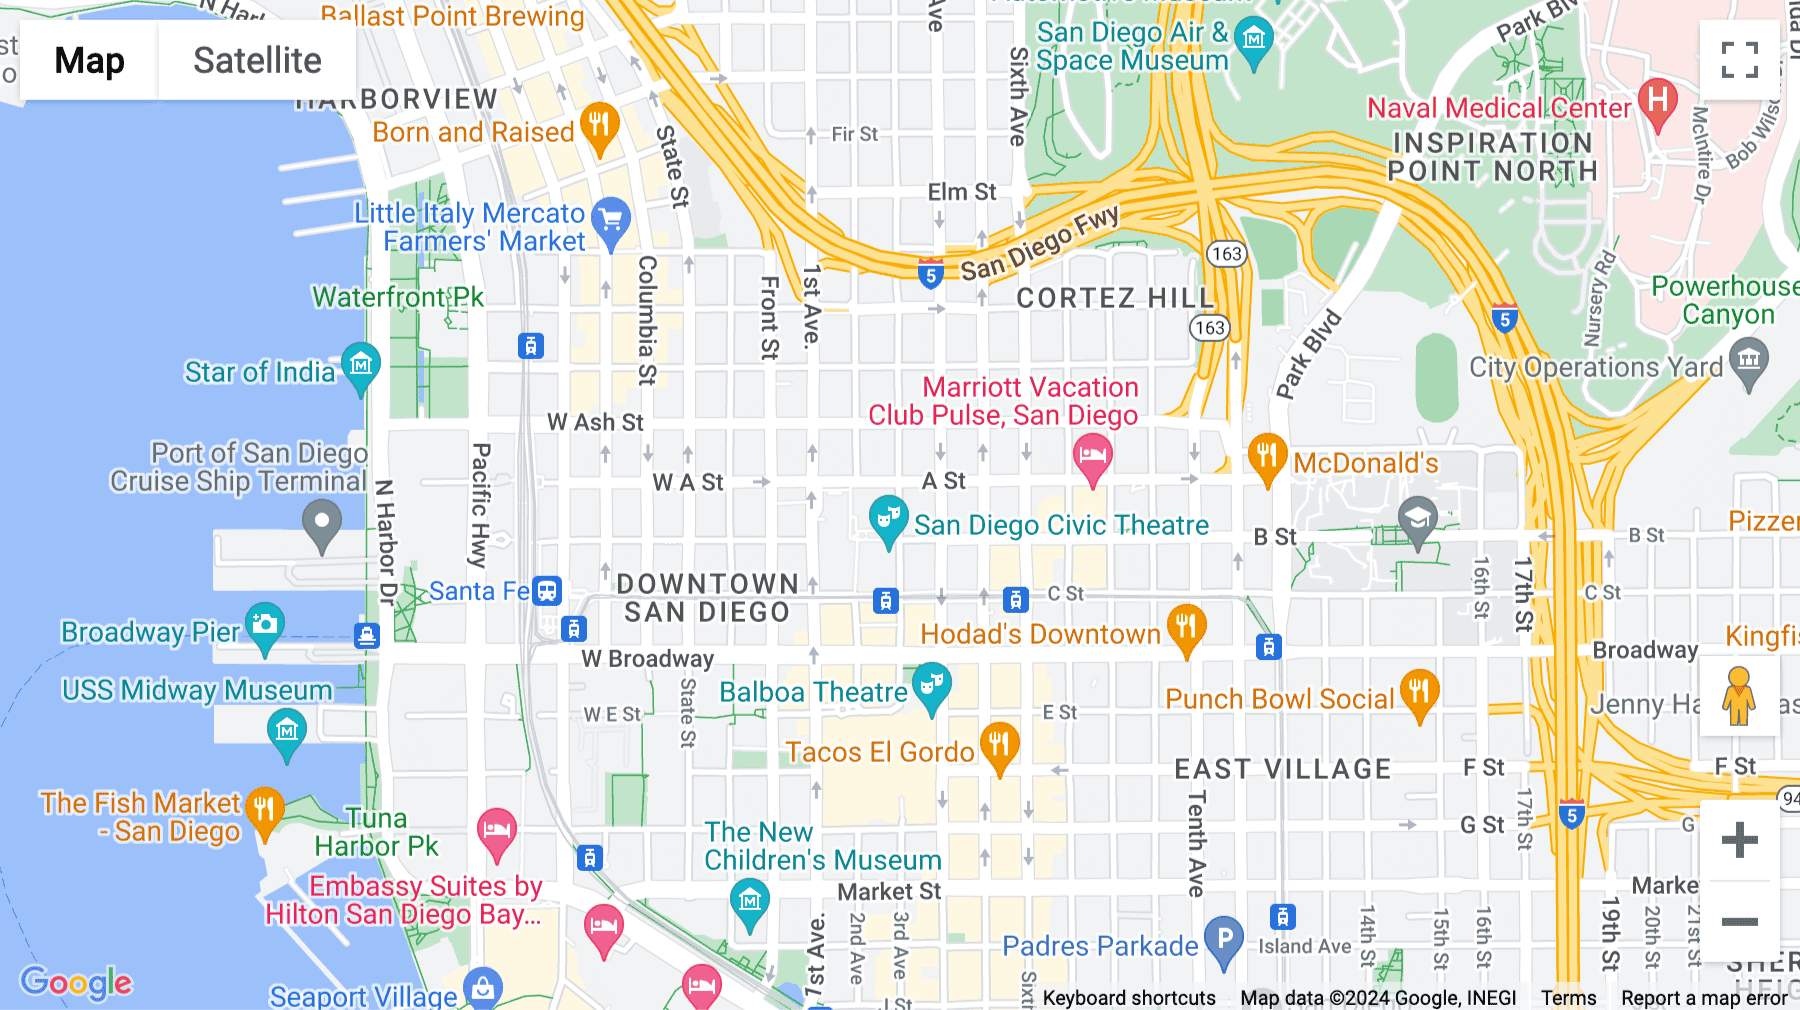 Click for interative map of 501 West Broadway, Koll Center, Suite 800, San Diego